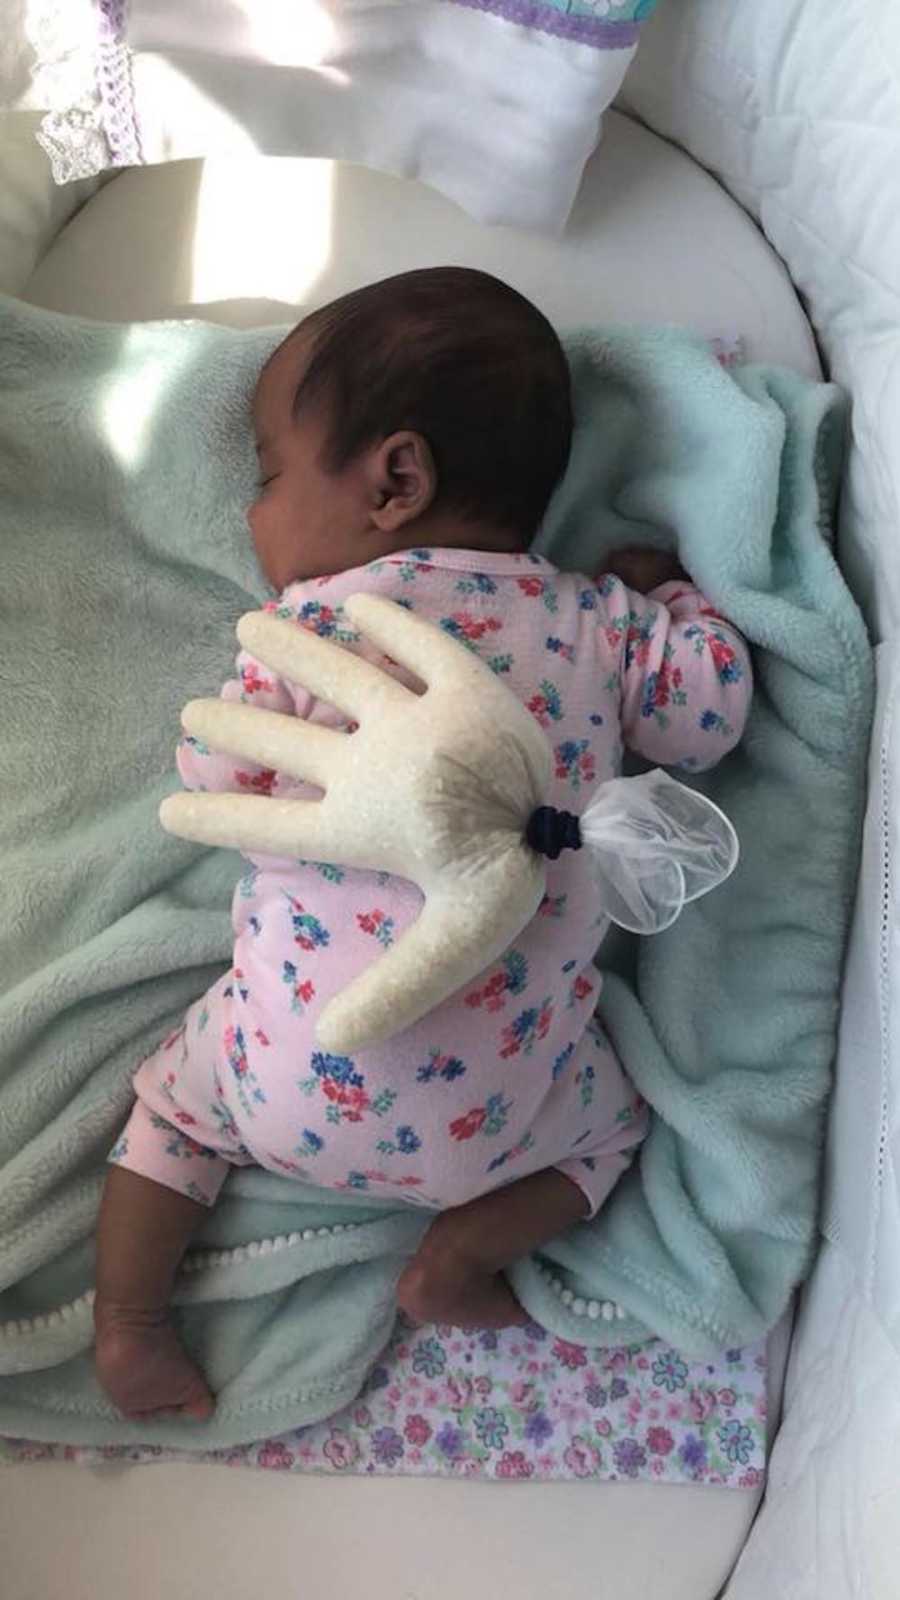 Newborn sleeps peacefully in her bassinet with a glove filled with rice on her back